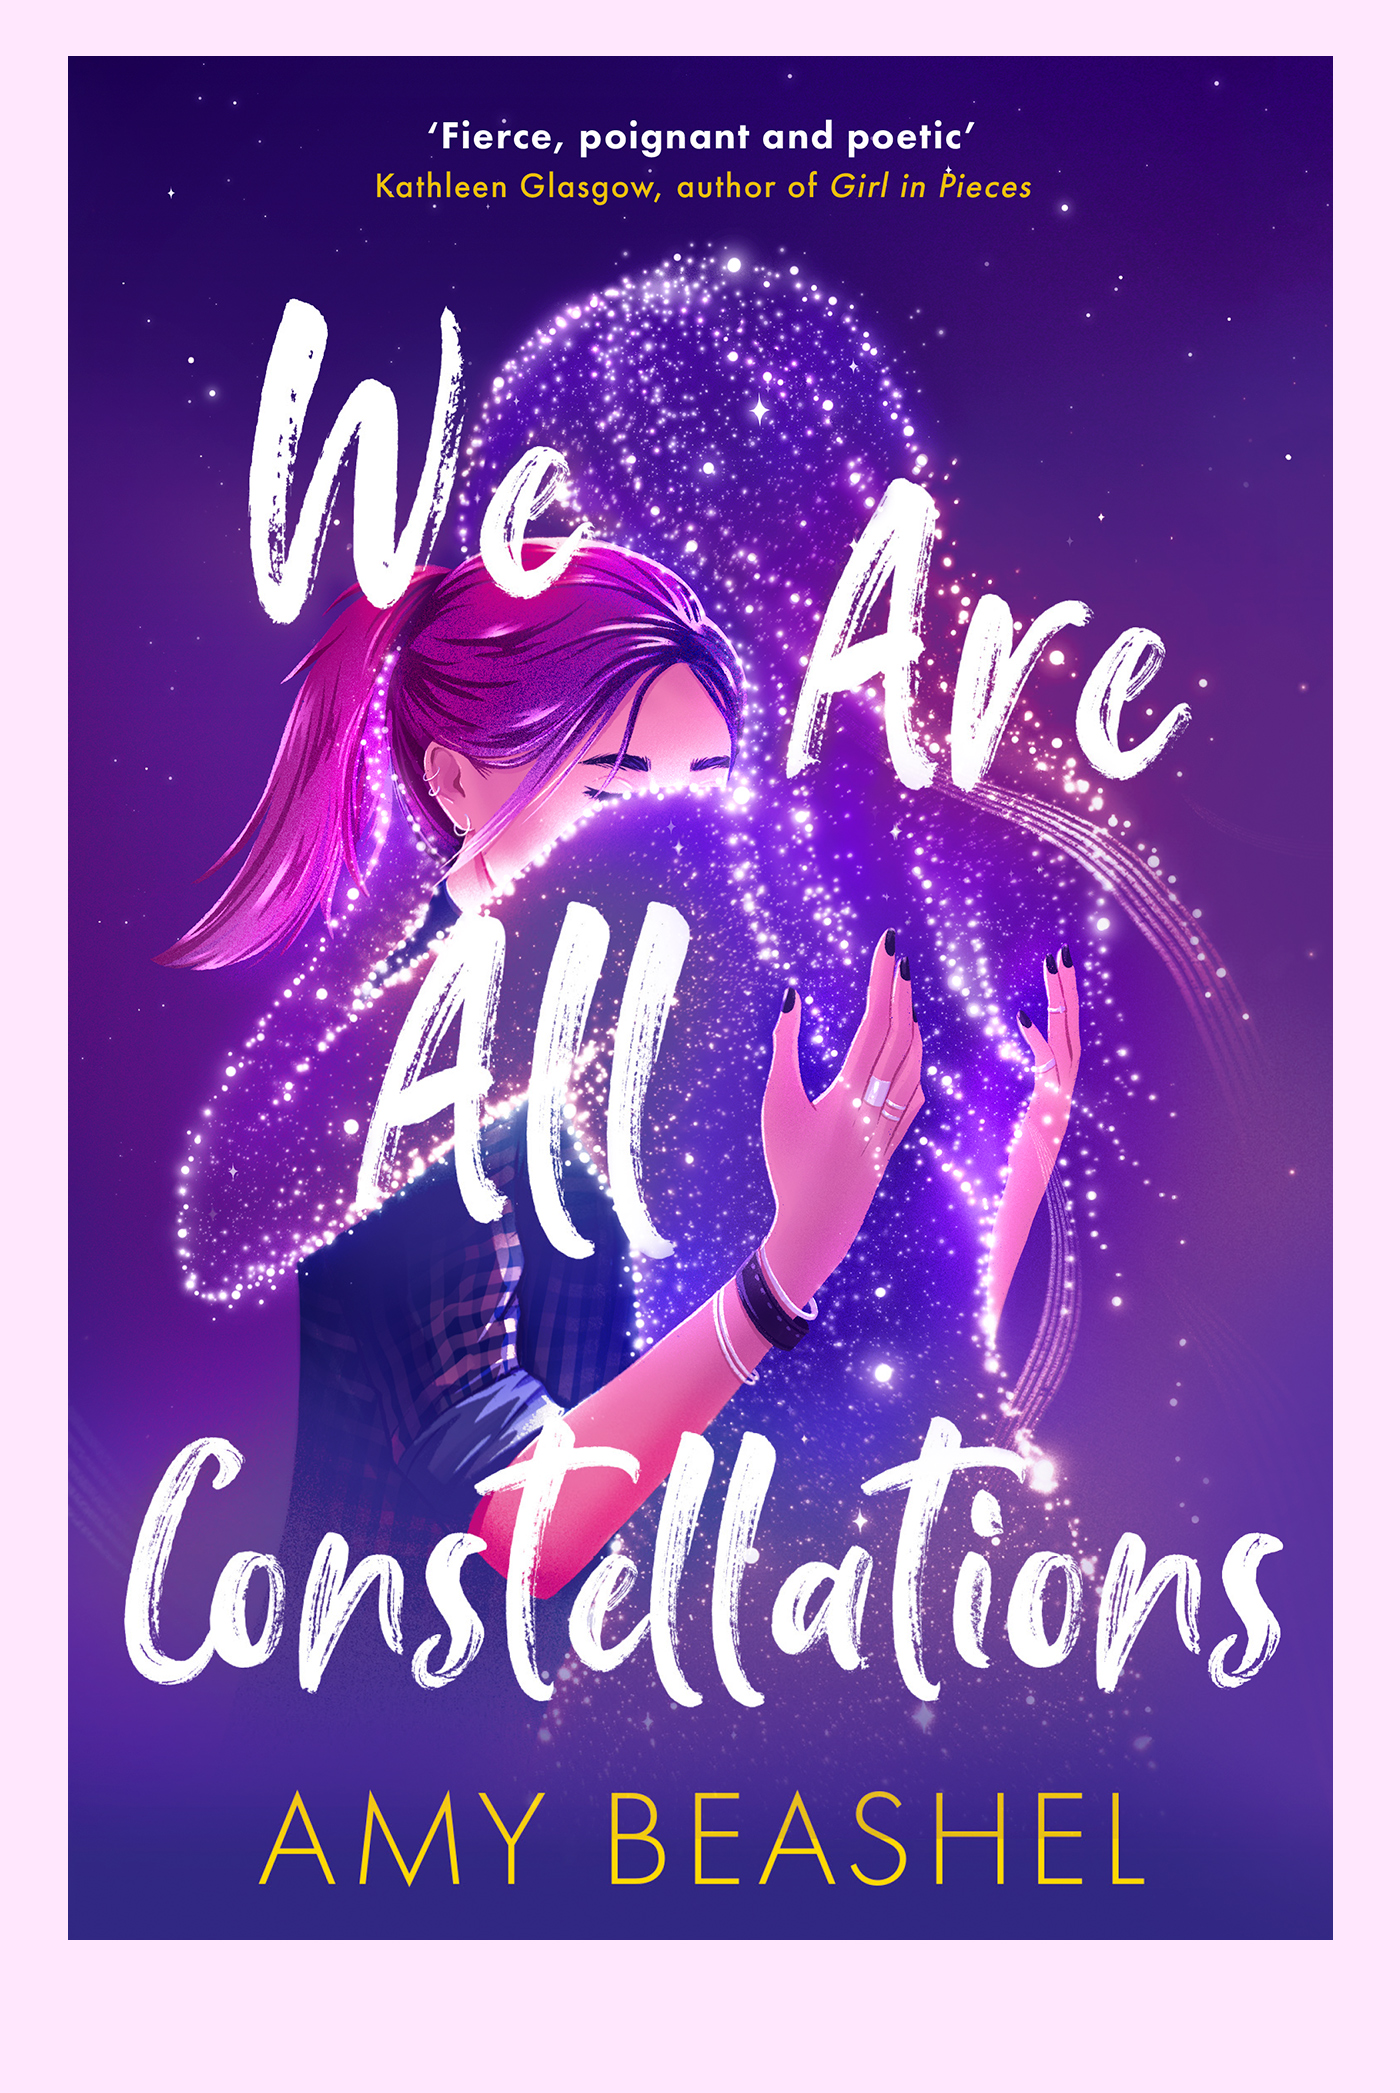 Constellations_book-cover_illustration_by_anna-kuptsova_04